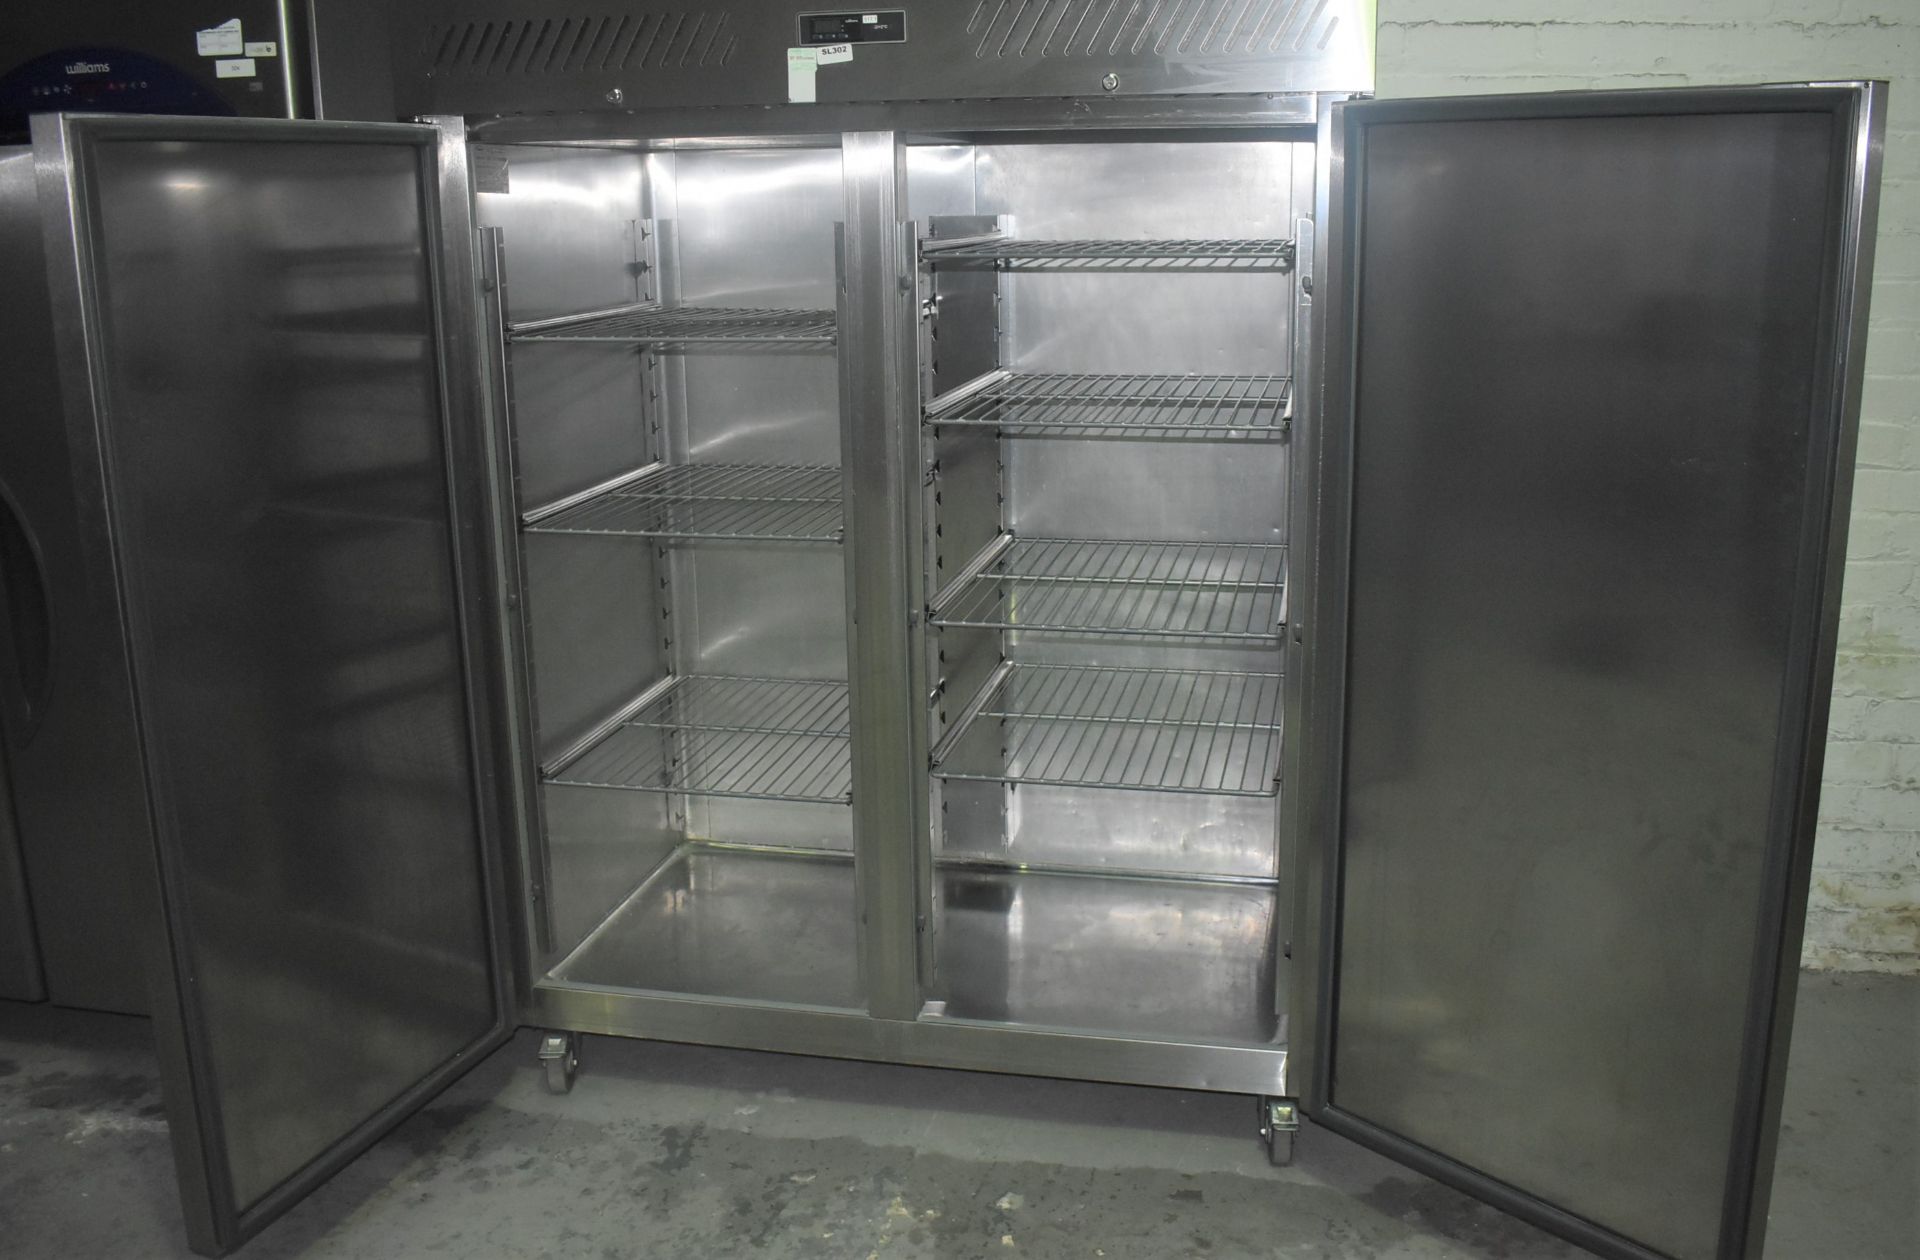 1 x Williams Double Door Upright Refrigerator - Model MJ2SA - Recently Removed From Major - Image 3 of 7